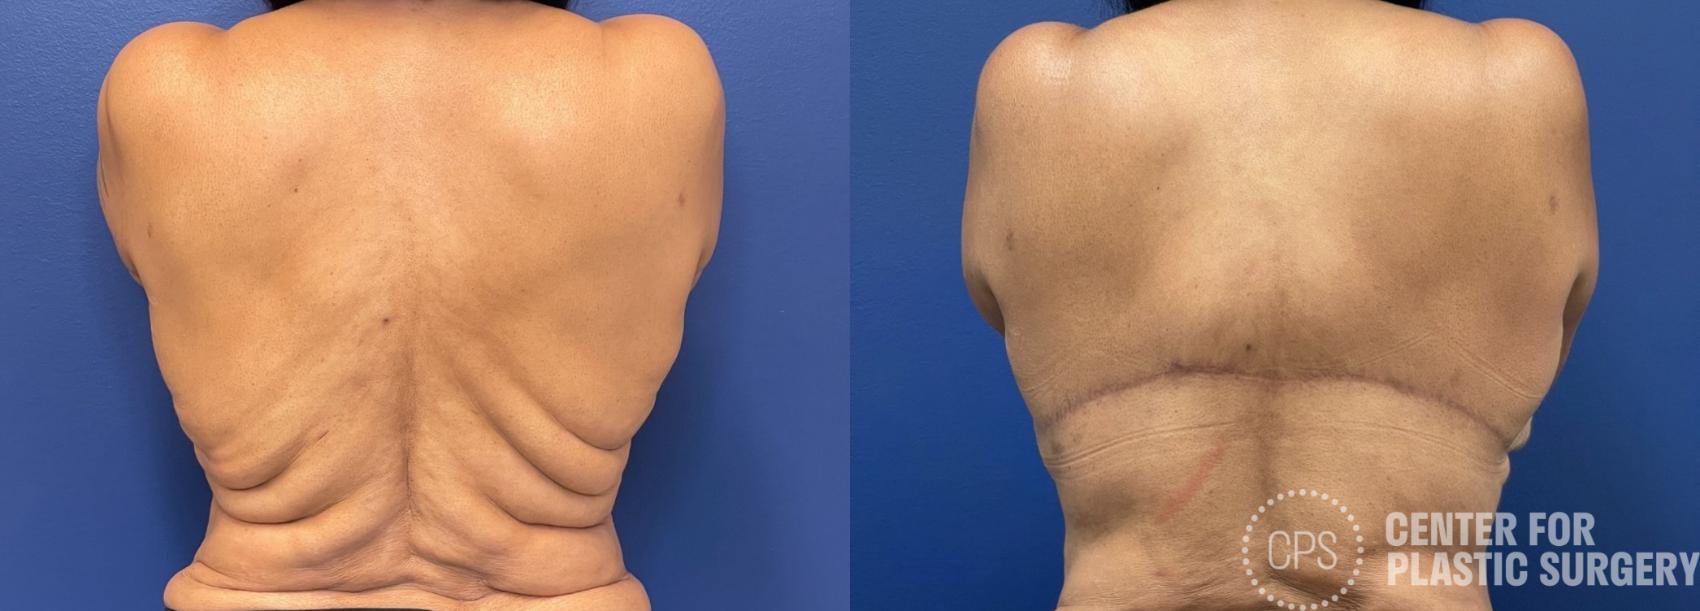 Body Lift Case 274 Before & After Back | Chevy Chase & Annandale, Washington D.C. Metropolitan Area | Center for Plastic Surgery